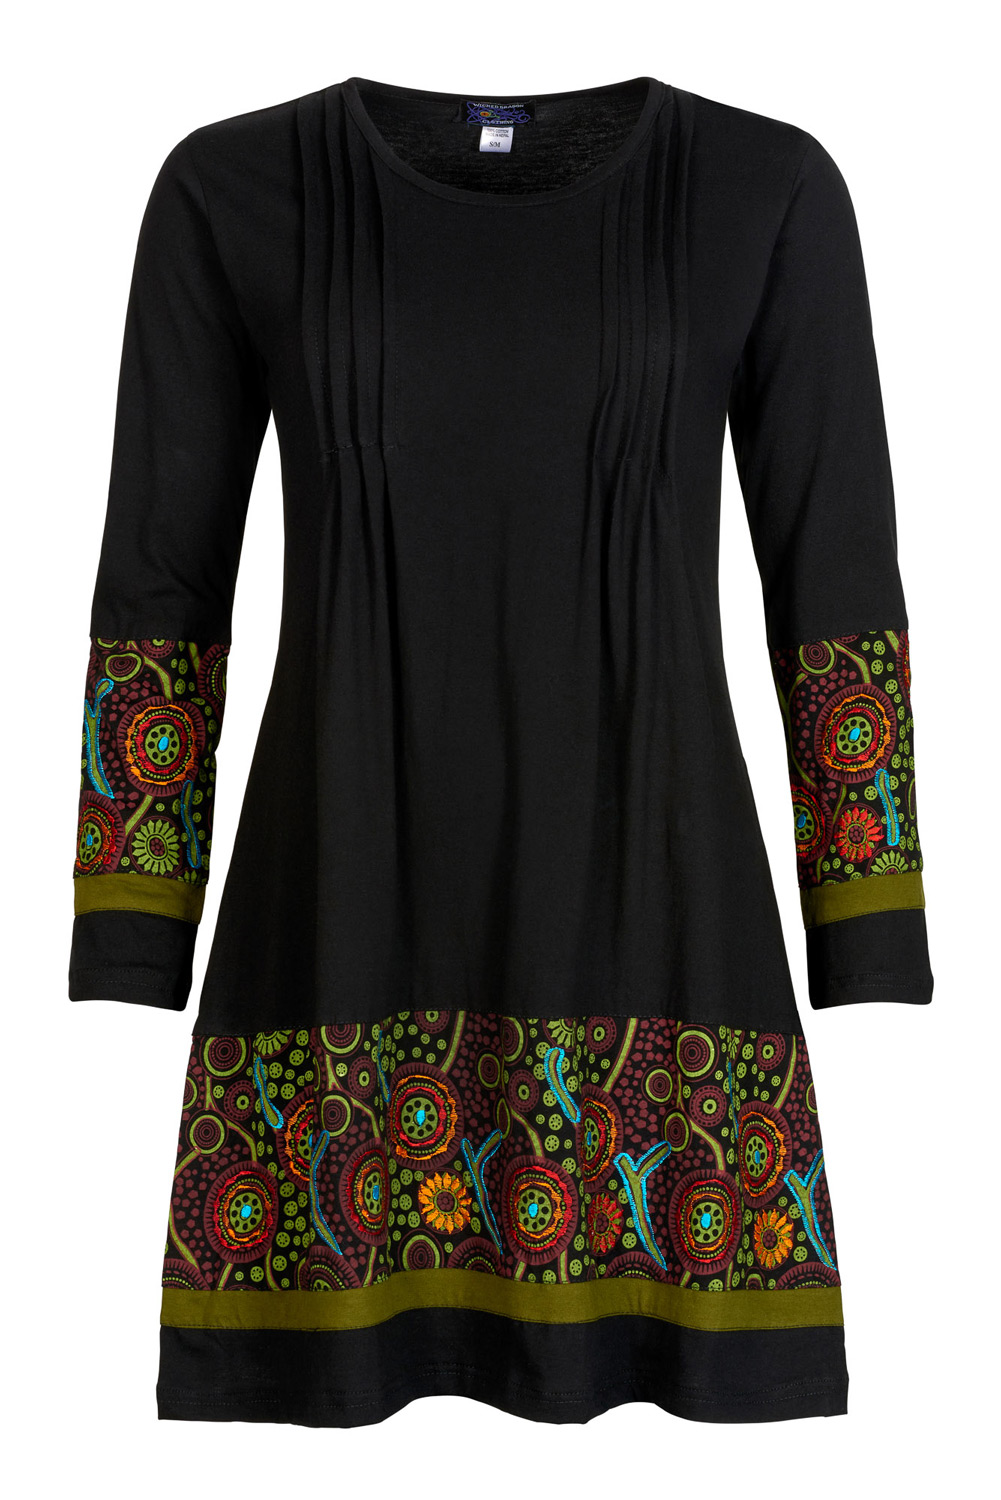 Black long sleeve dress with colourful trim